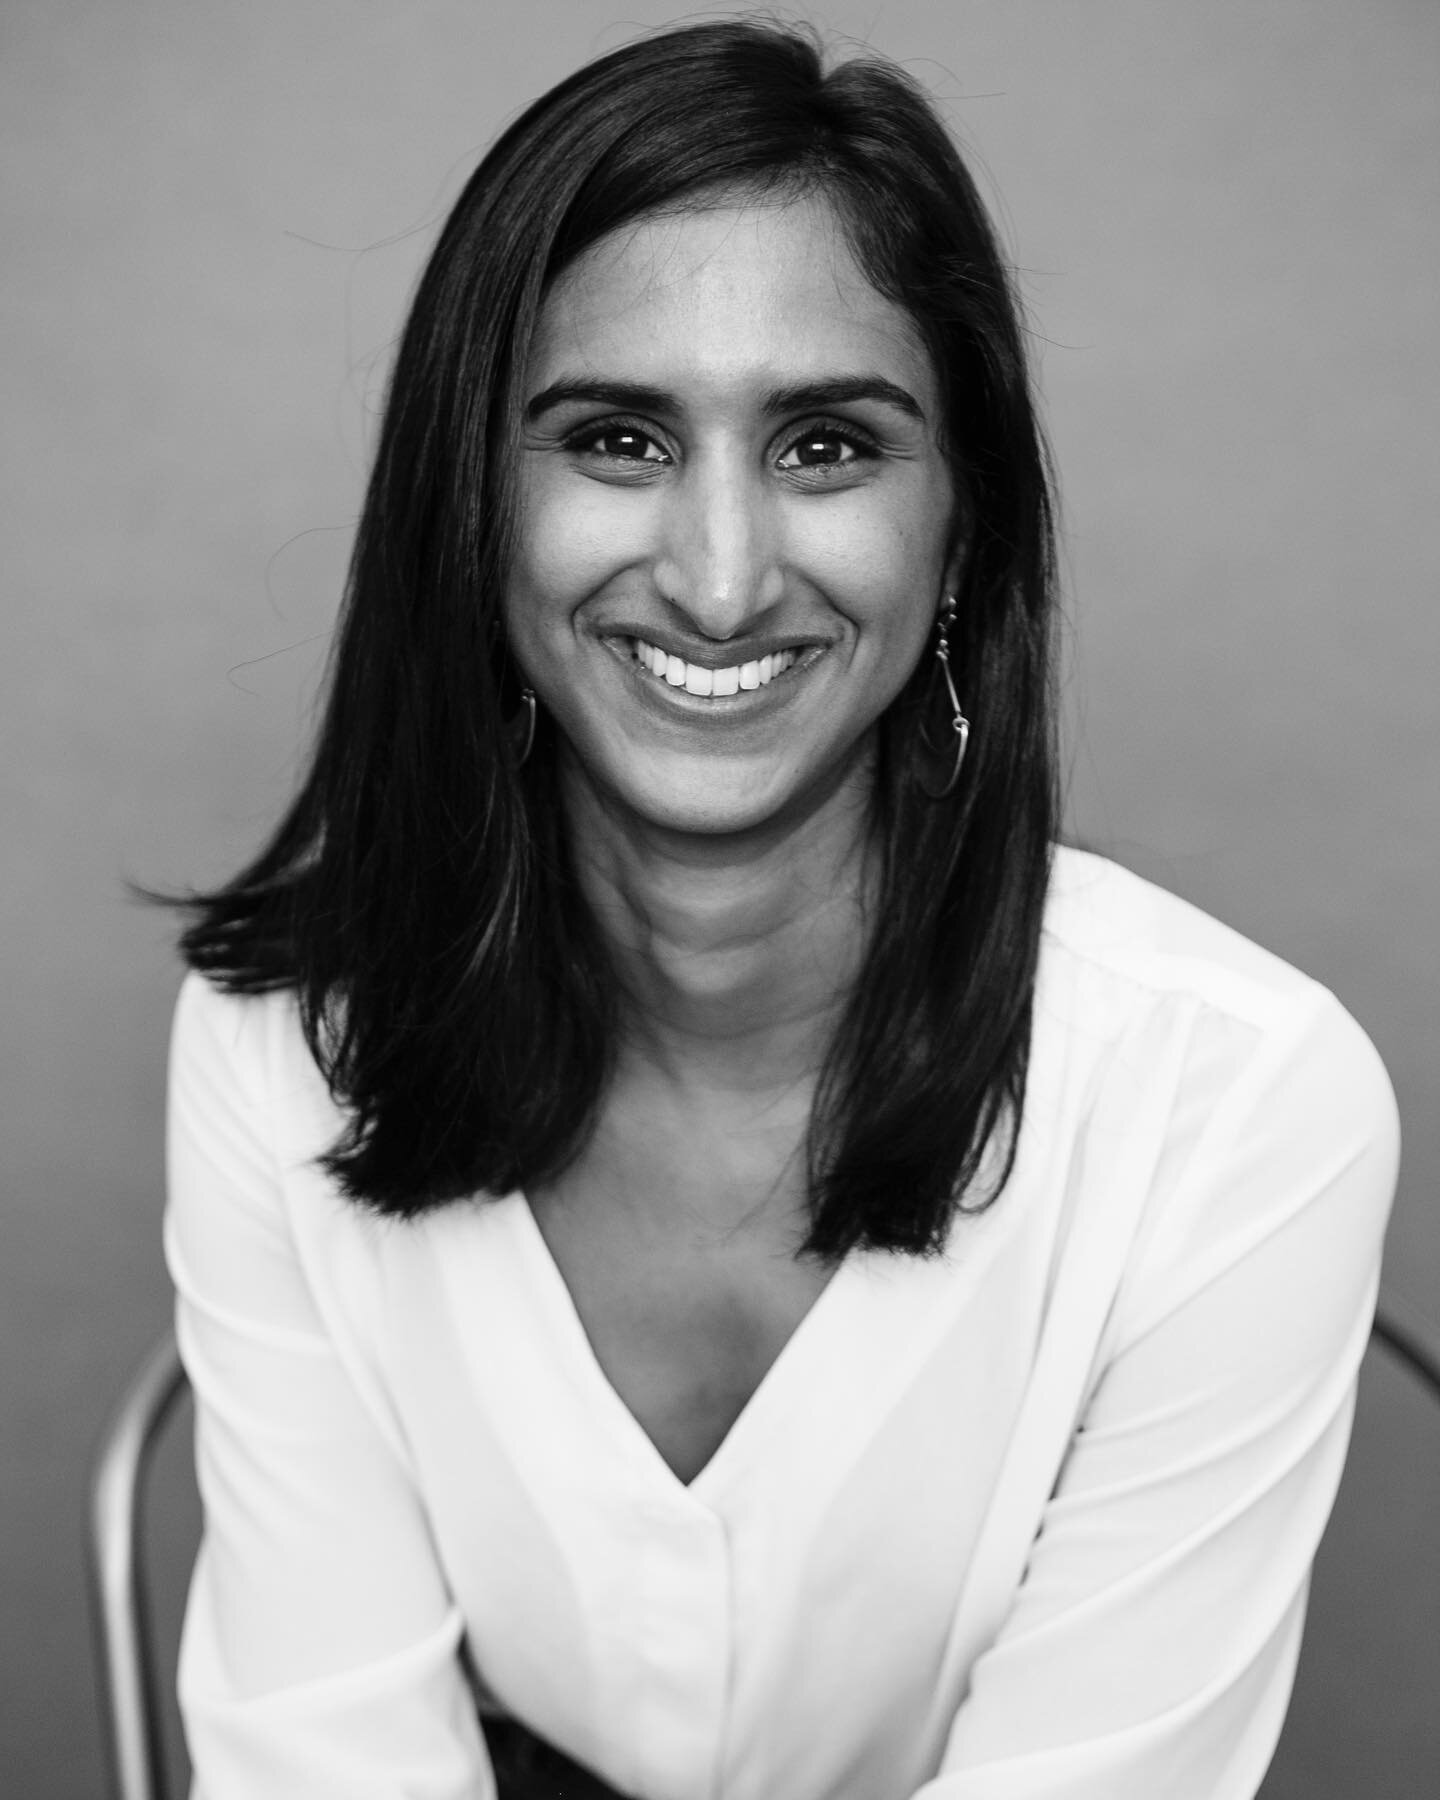 Updating my headshot pitch doc reminded me of this shoot with Shobha Philips, the founder and wildly impressive force behind @wearproclaim